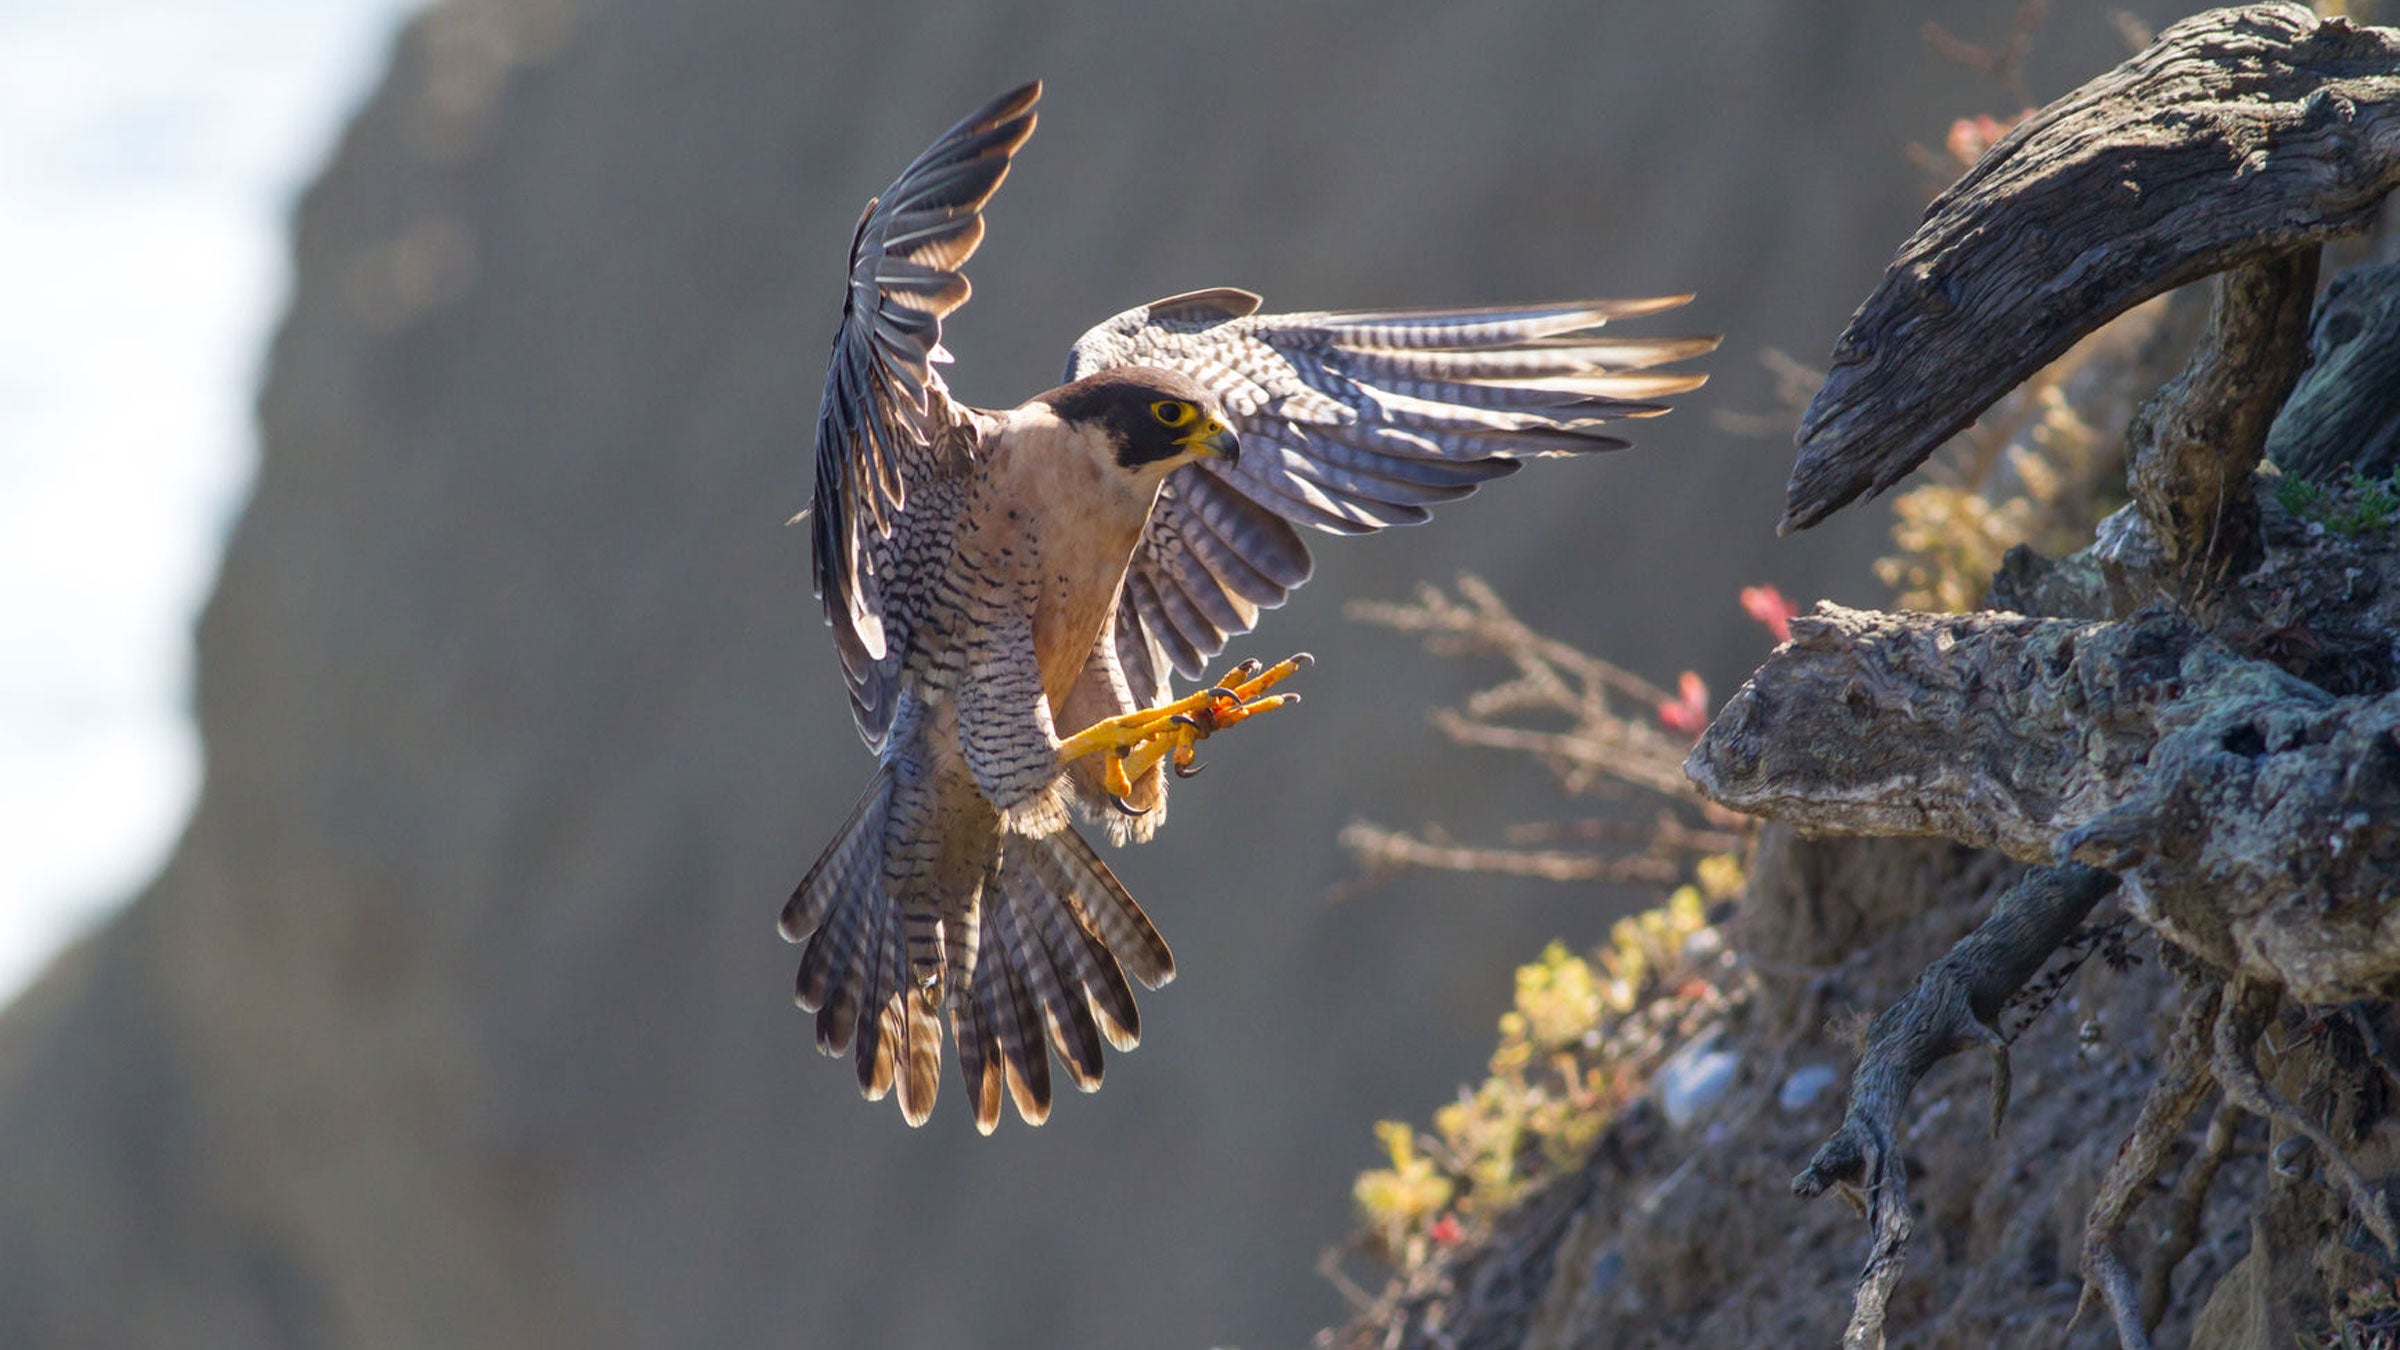 Peregrine Falcon: From Endangered Species to Urban Bird